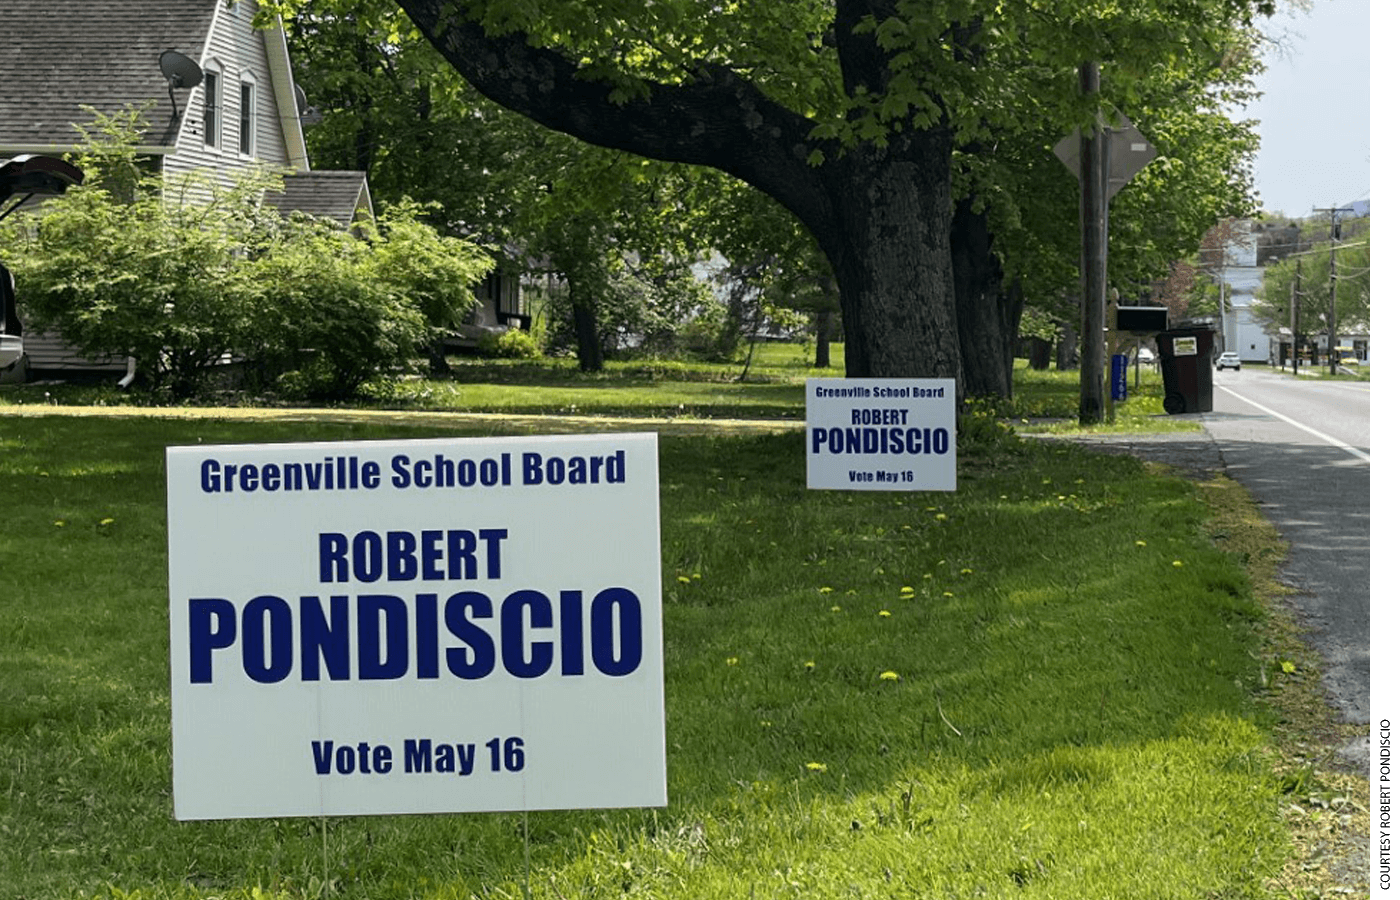 Campaign signs for Robert Pondiscio on a lawn